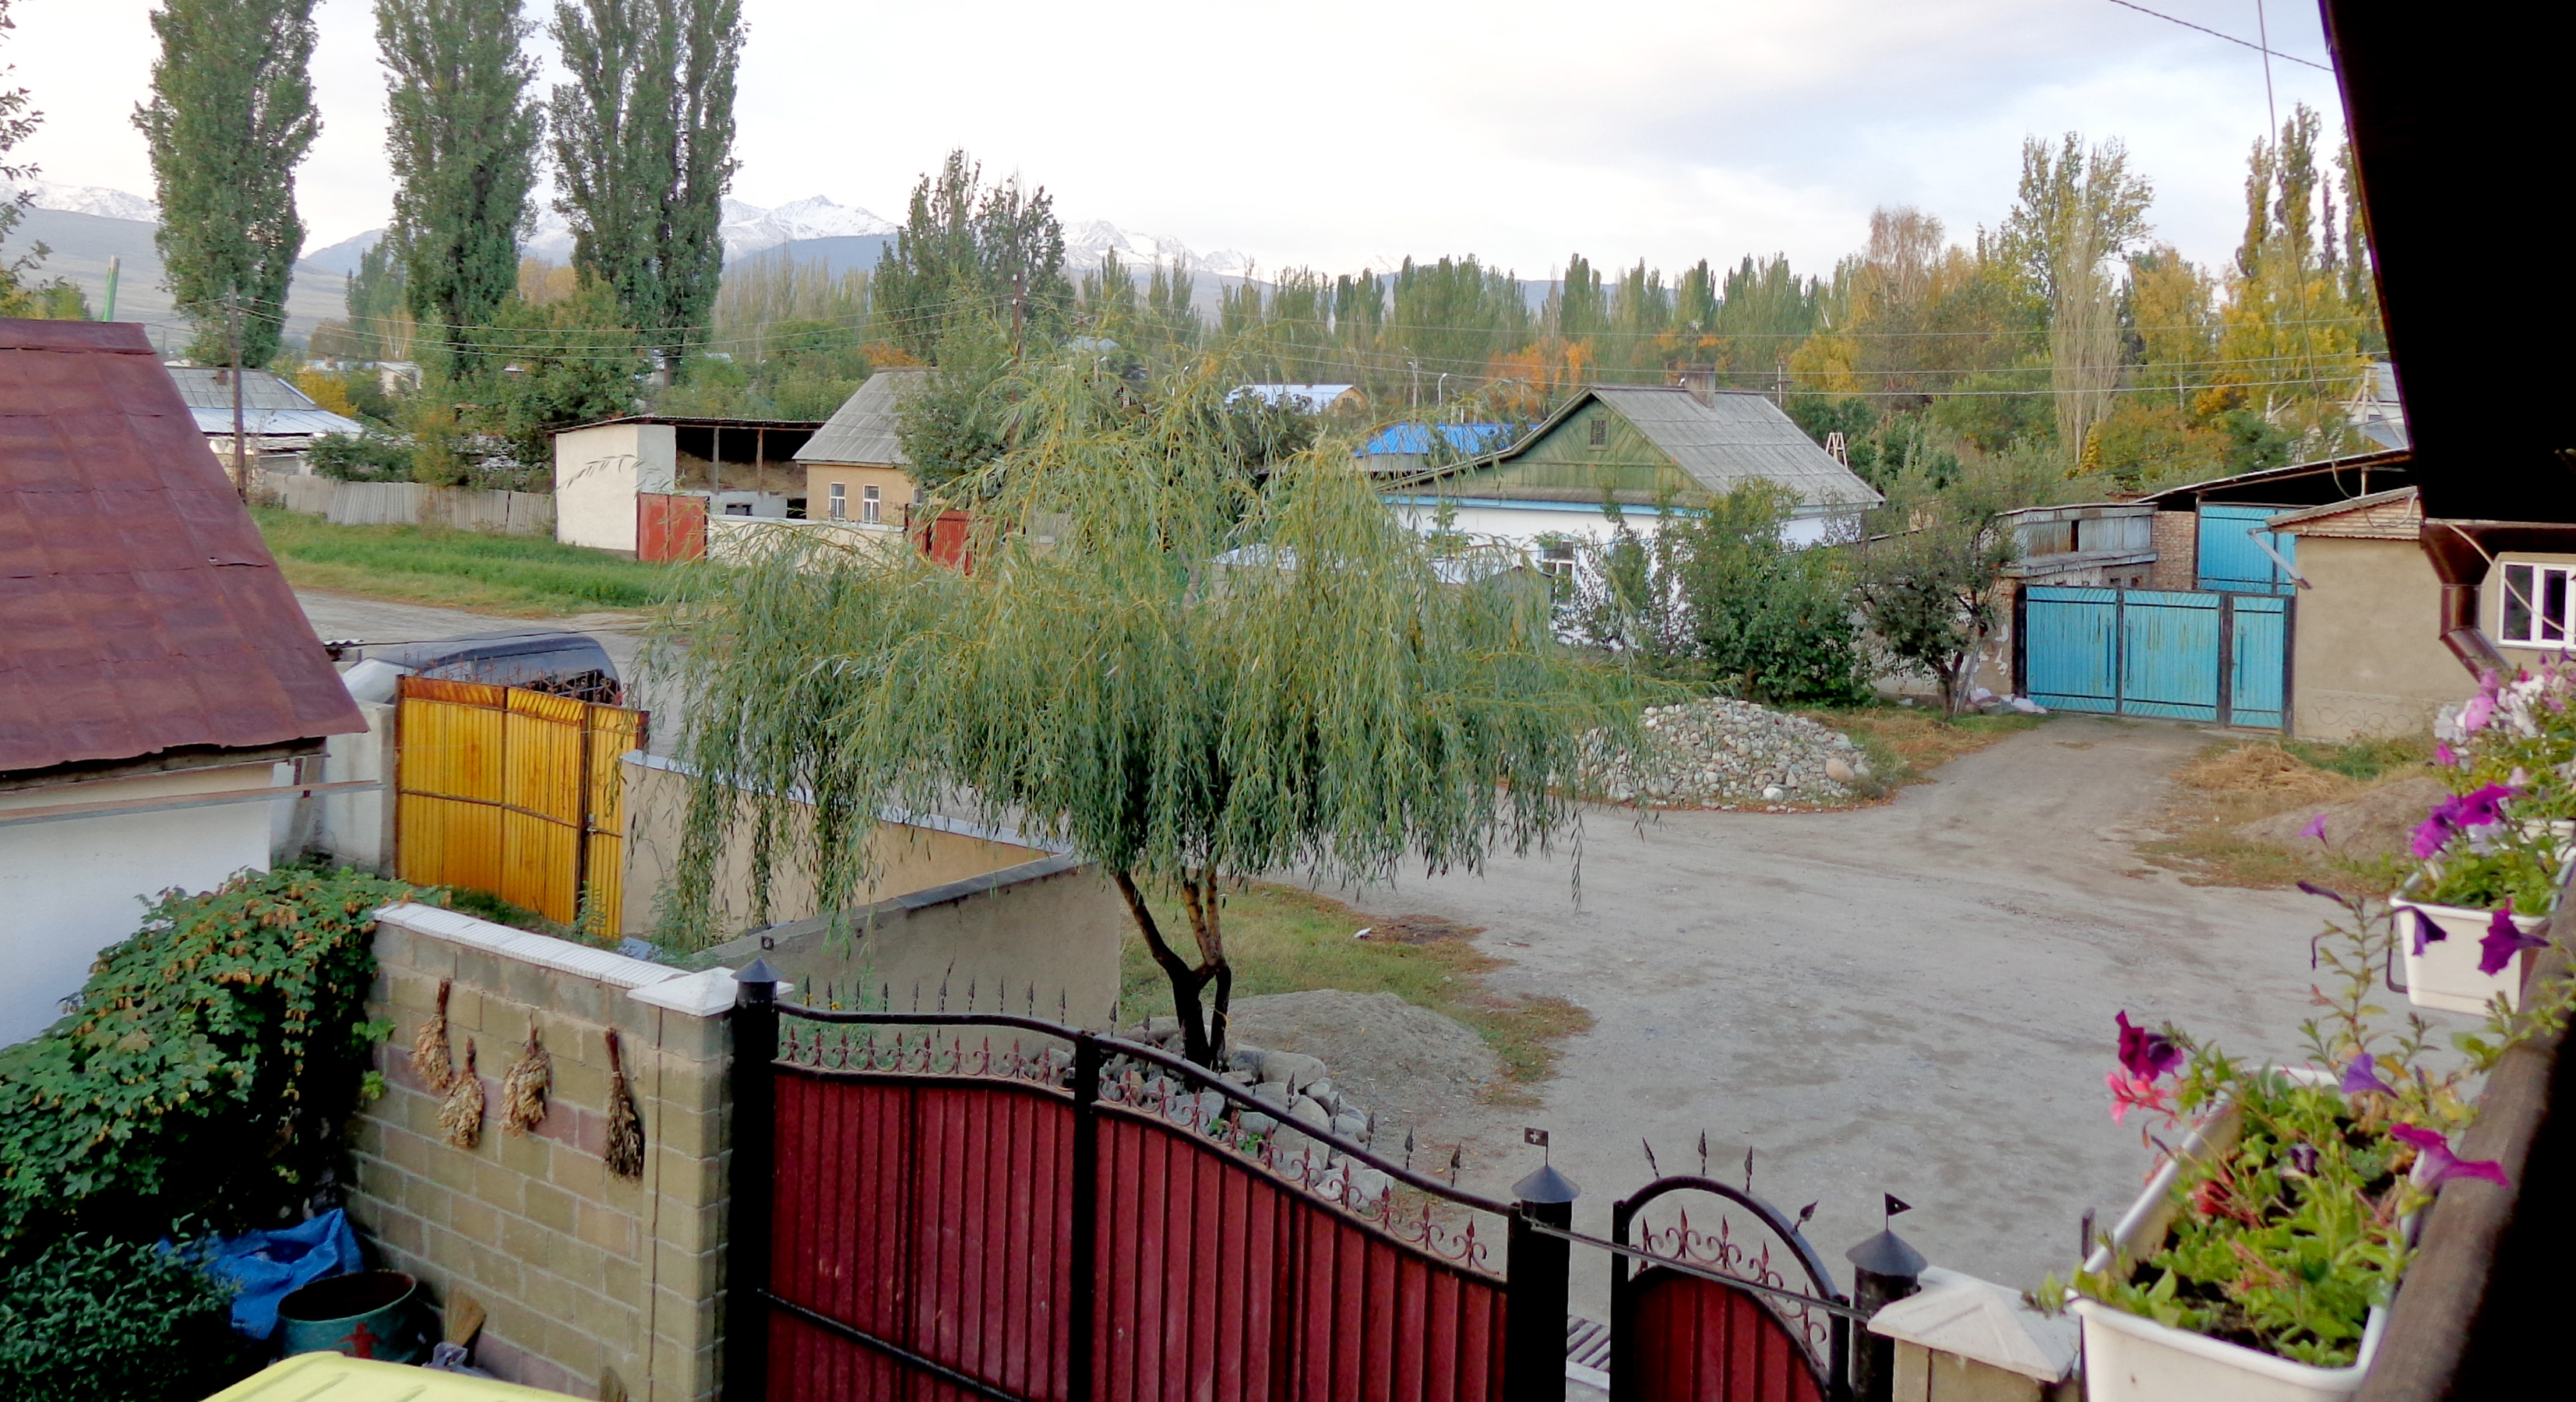 Typical neighborhood in Central Asia